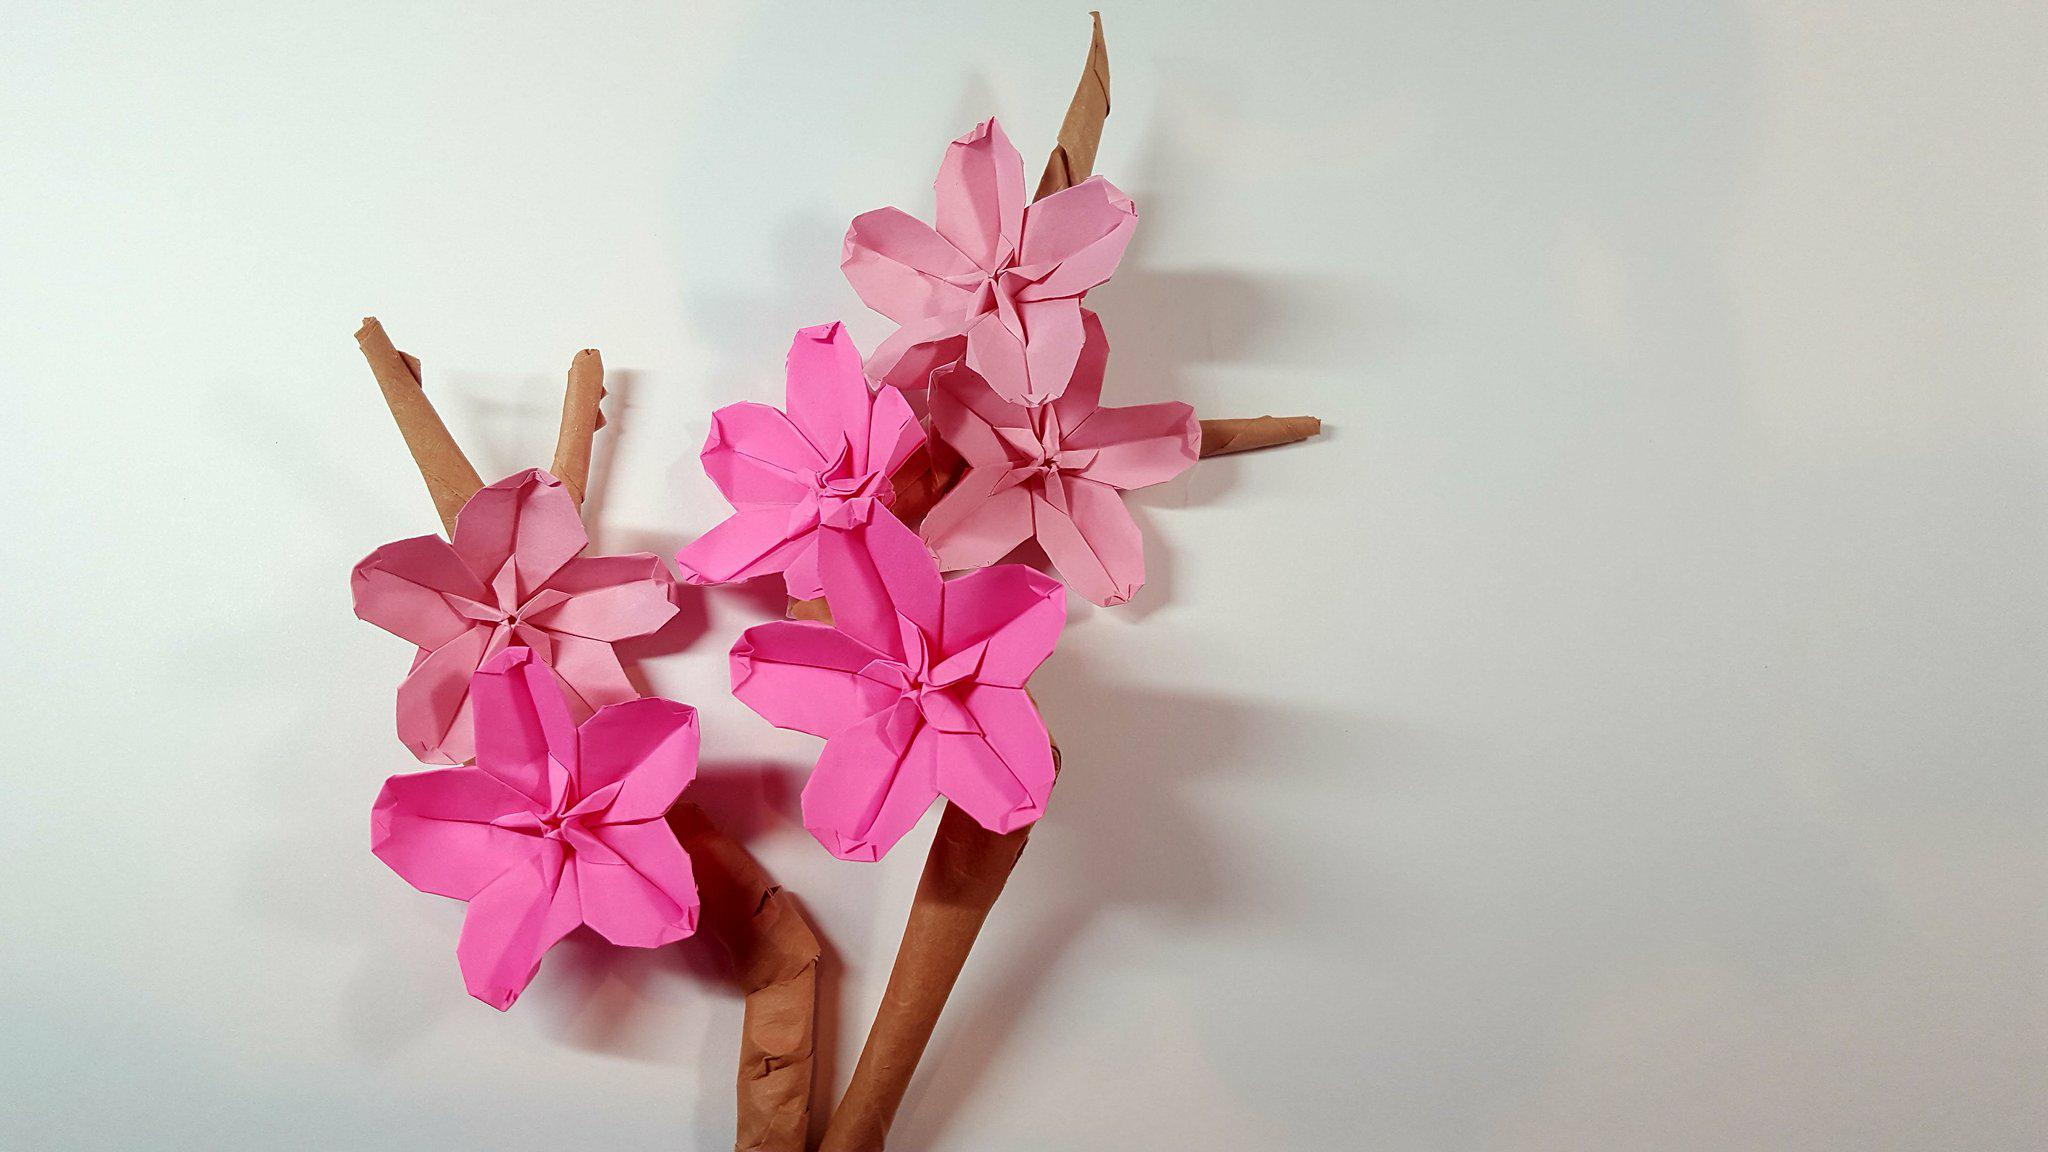 Origami Cherry Blossom Origami Cherry Blossom For New Year Decoration Origami